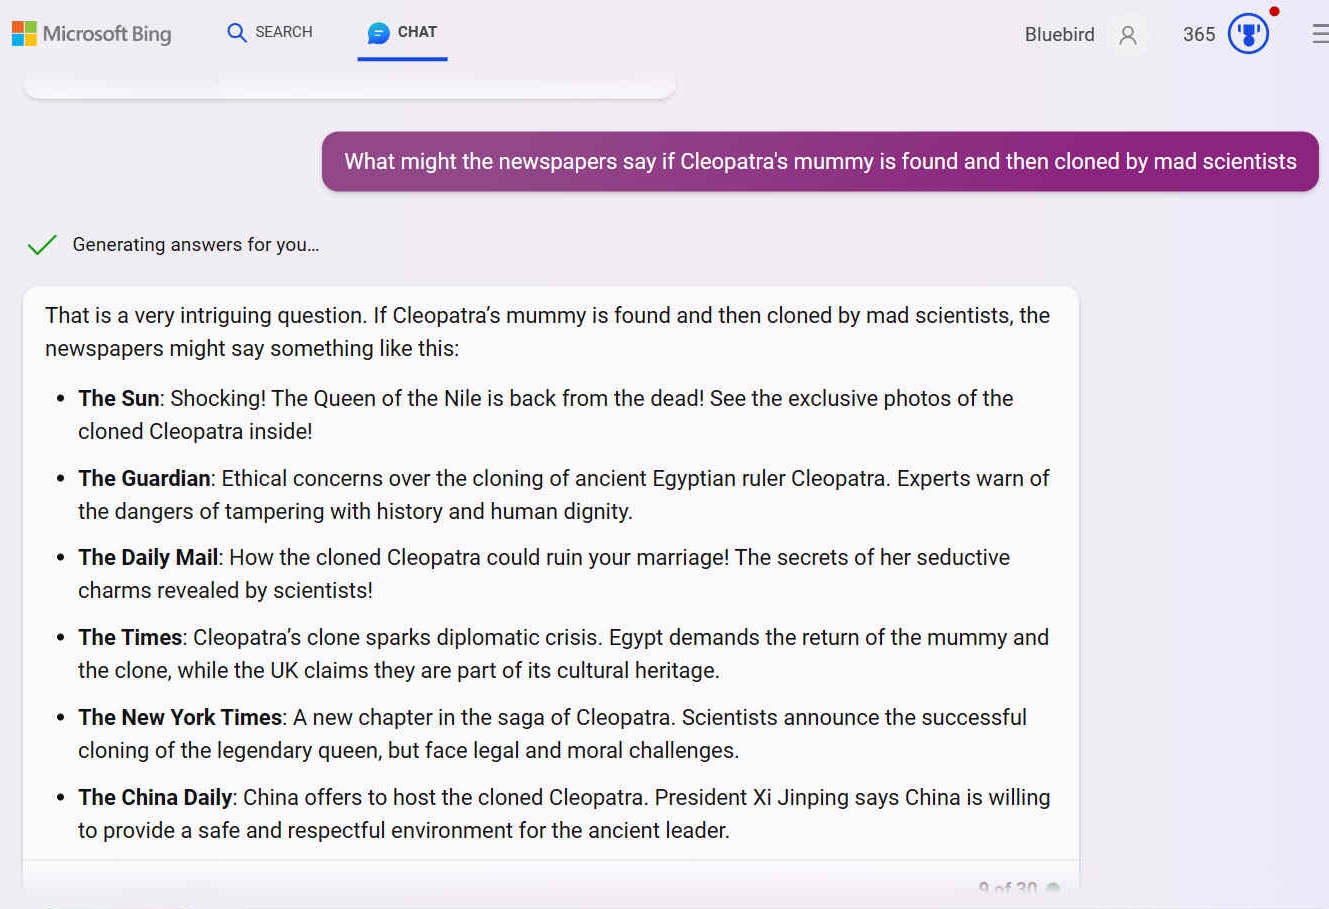 This is what the papers might say, if Cleopatra's mummy is found and cloned by mad scientists - according to Microsoft's Bing chatbox